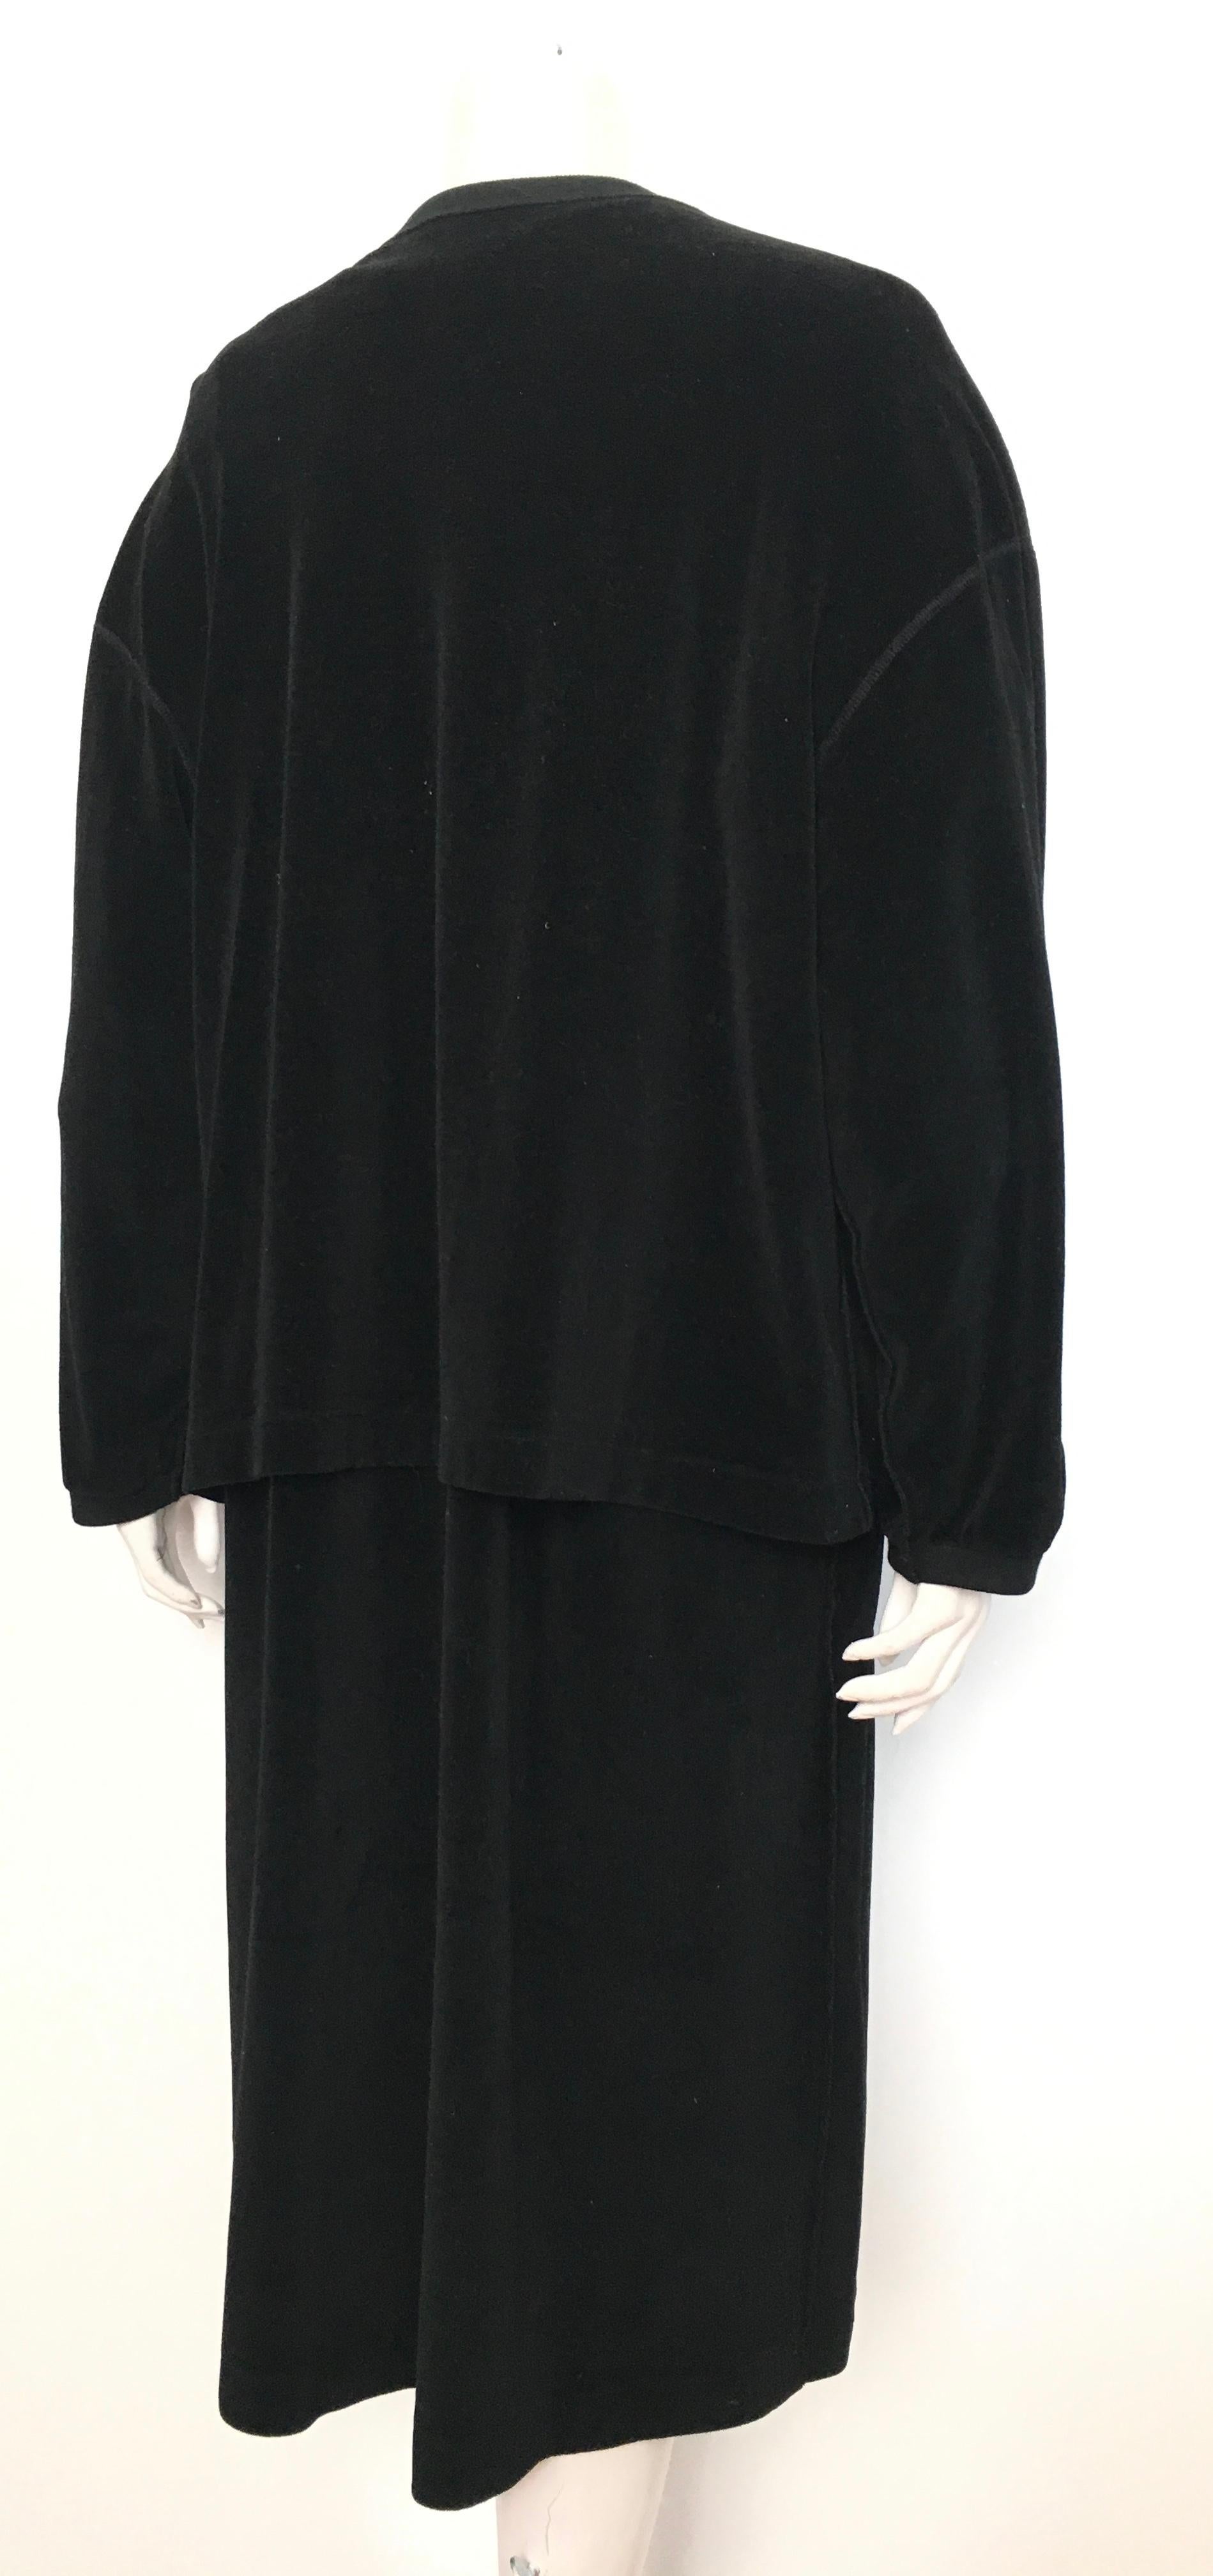 Sonia Rykiel 1980s Black Velour Dress with Pockets & Cardigan Size Large. For Sale 12